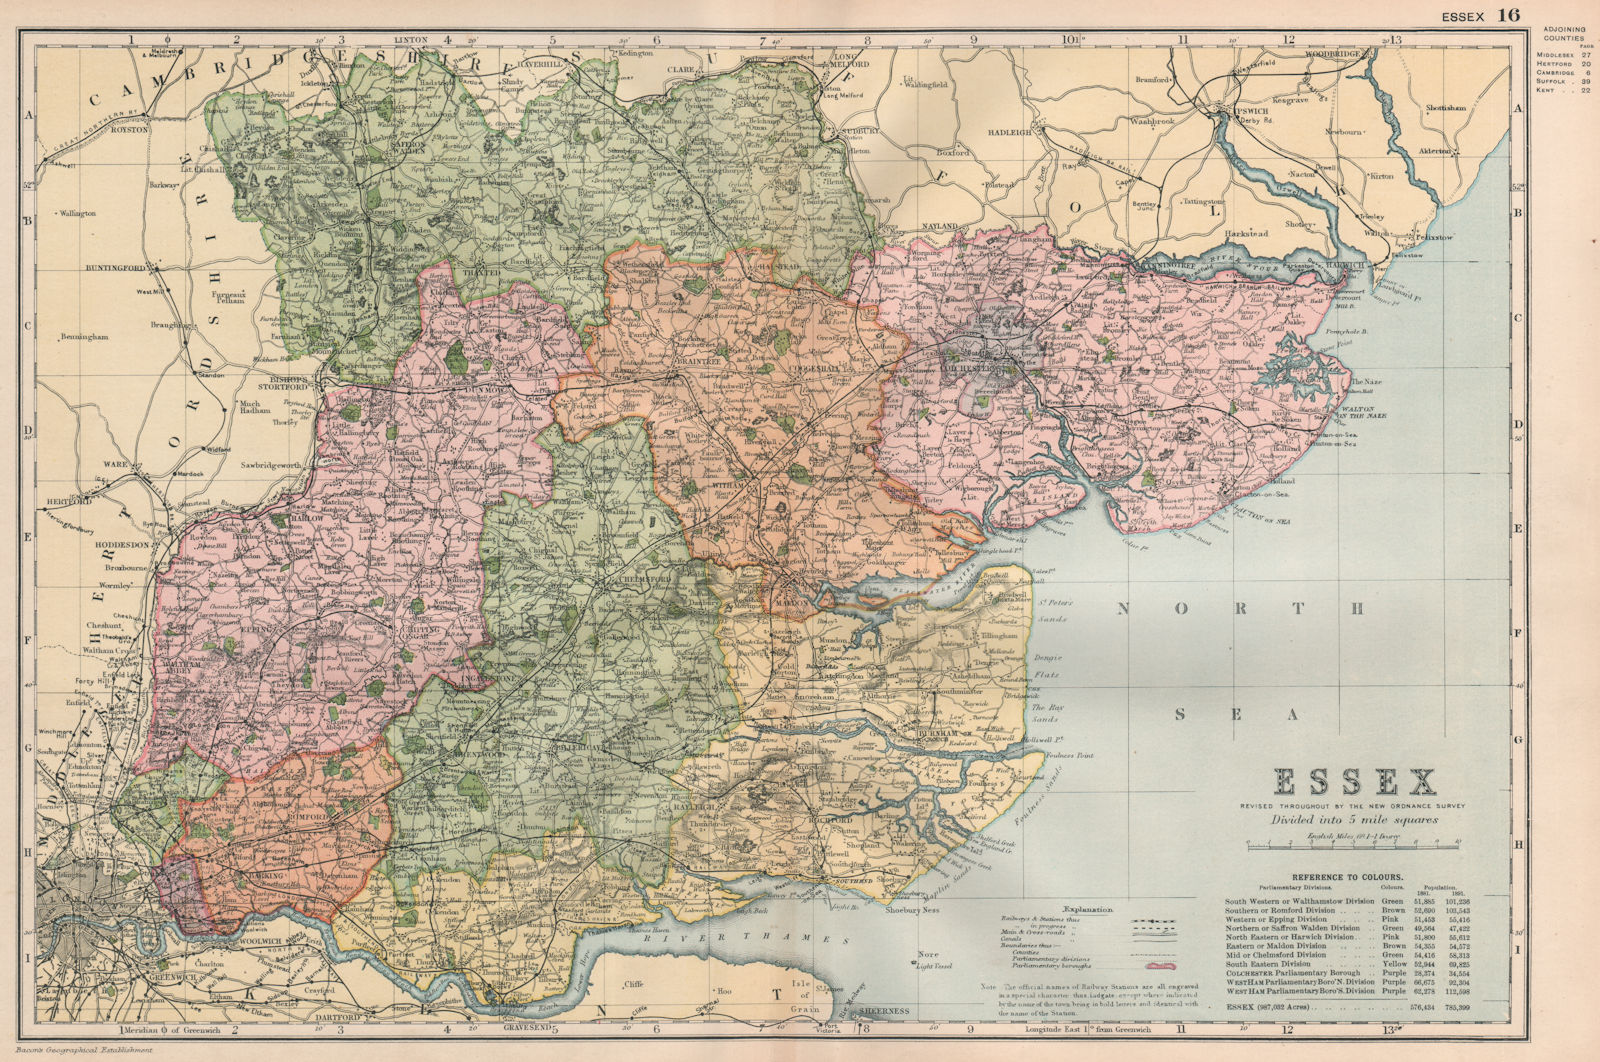 Associate Product ESSEX. Showing Parliamentary divisions, boroughs & parks. BACON 1896 old map